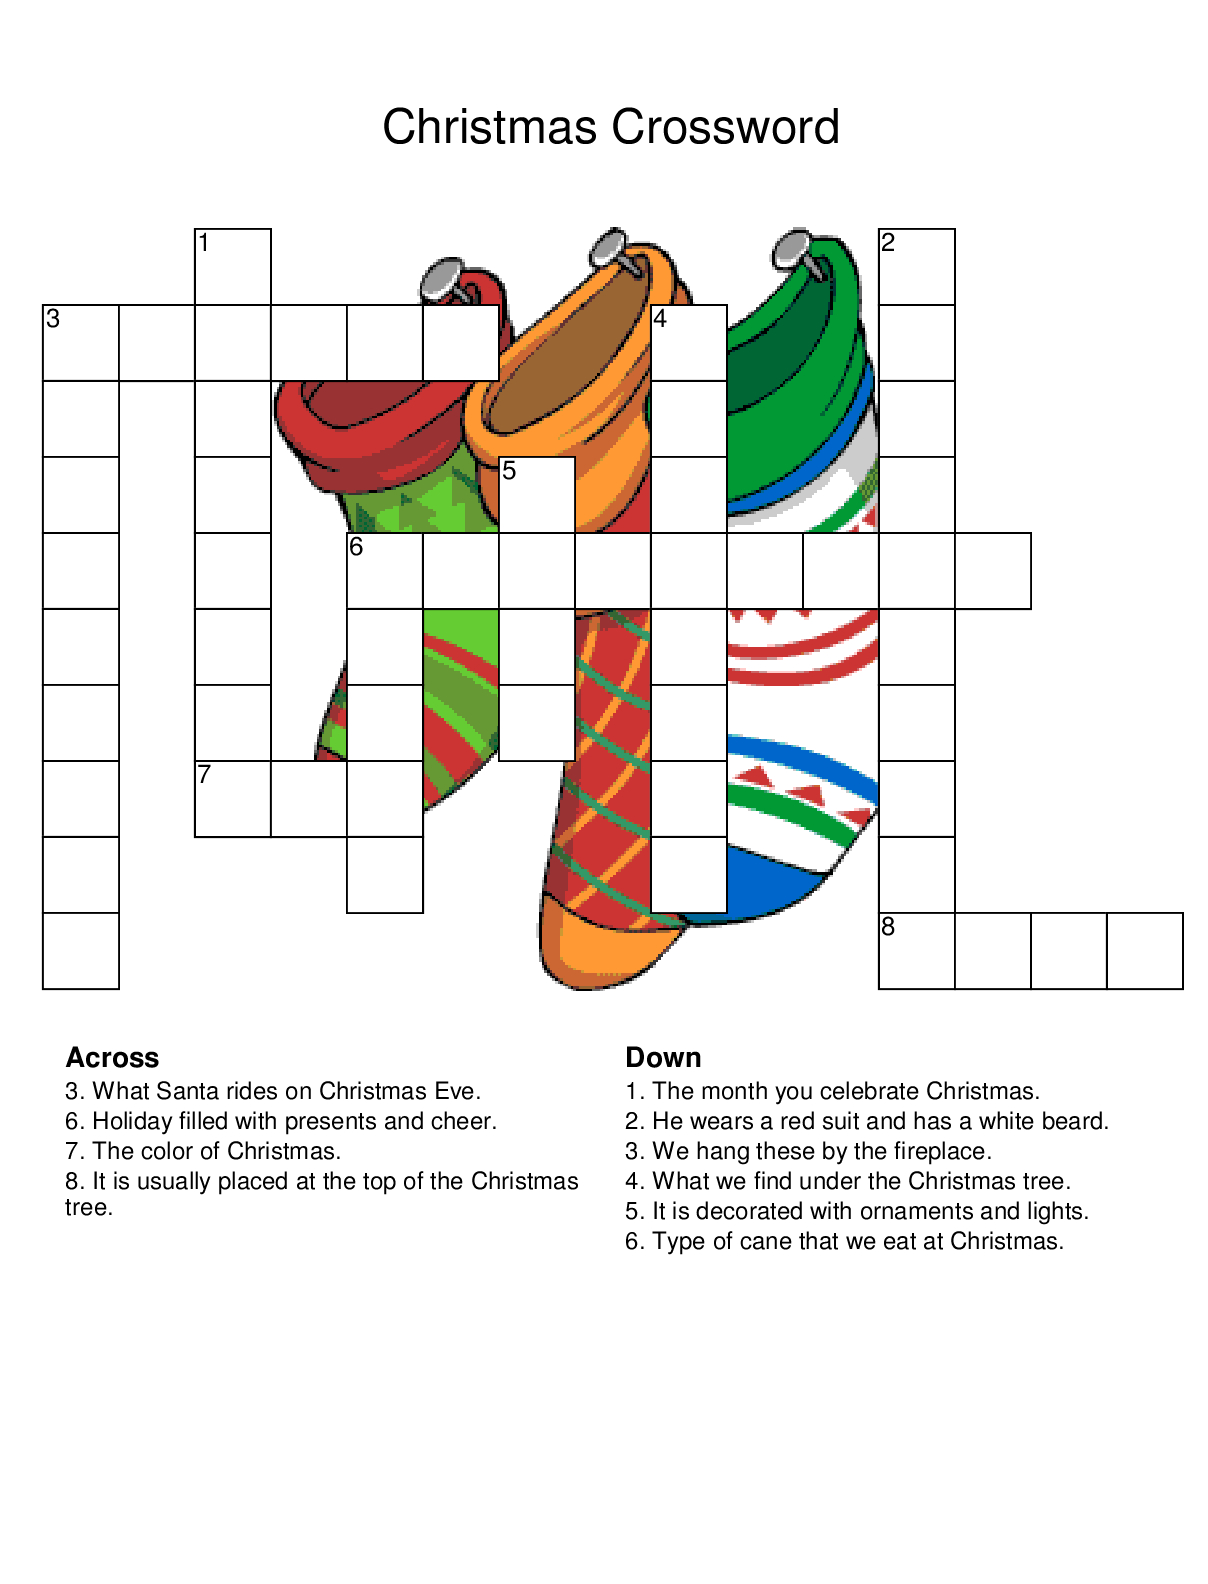 Christmas Crossword Puzzles - Best Coloring Pages For Kids - Printable Crossword Puzzles Christmas